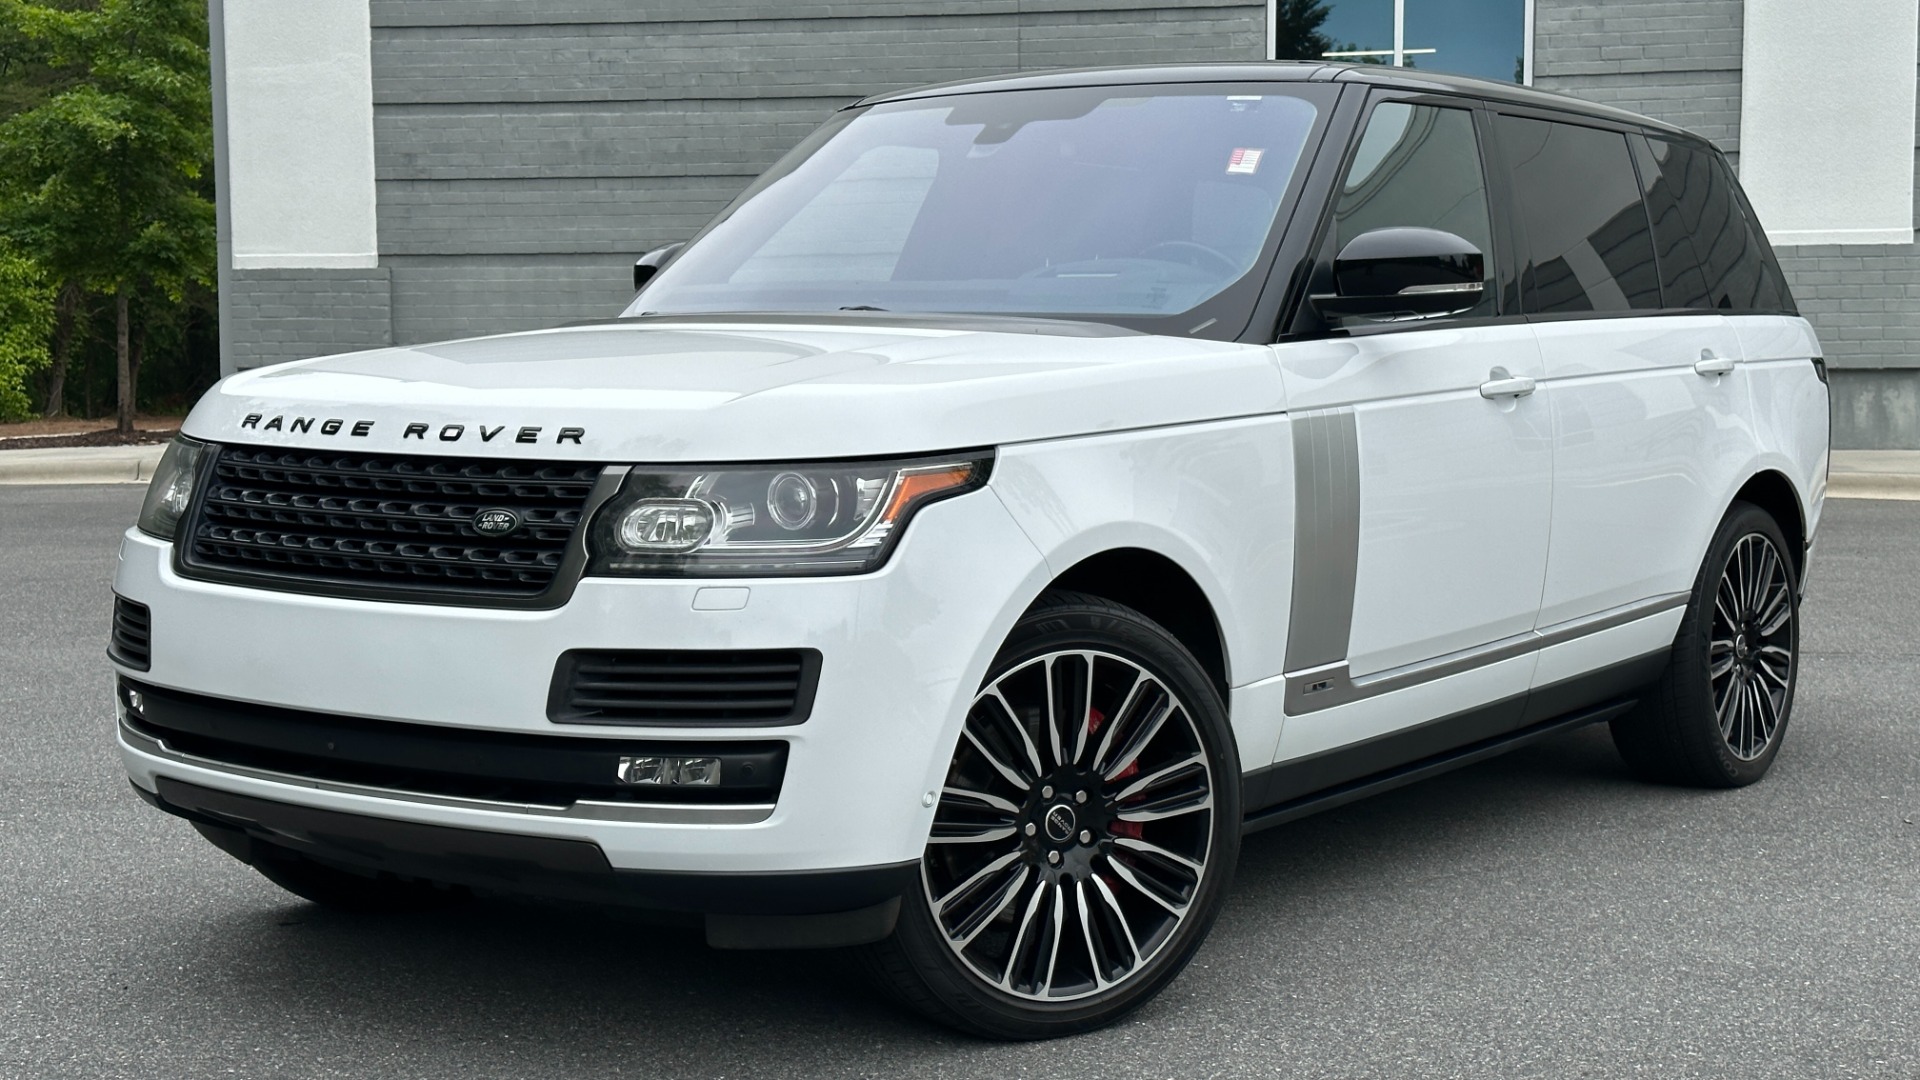 Used 2016 Land Rover Range Rover SUPERCHARGED 5.0 LWB / MERIDIAN / 22IN WHEELS / TOW PKG / CLIMATE PKG for sale $44,000 at Formula Imports in Charlotte NC 28227 1